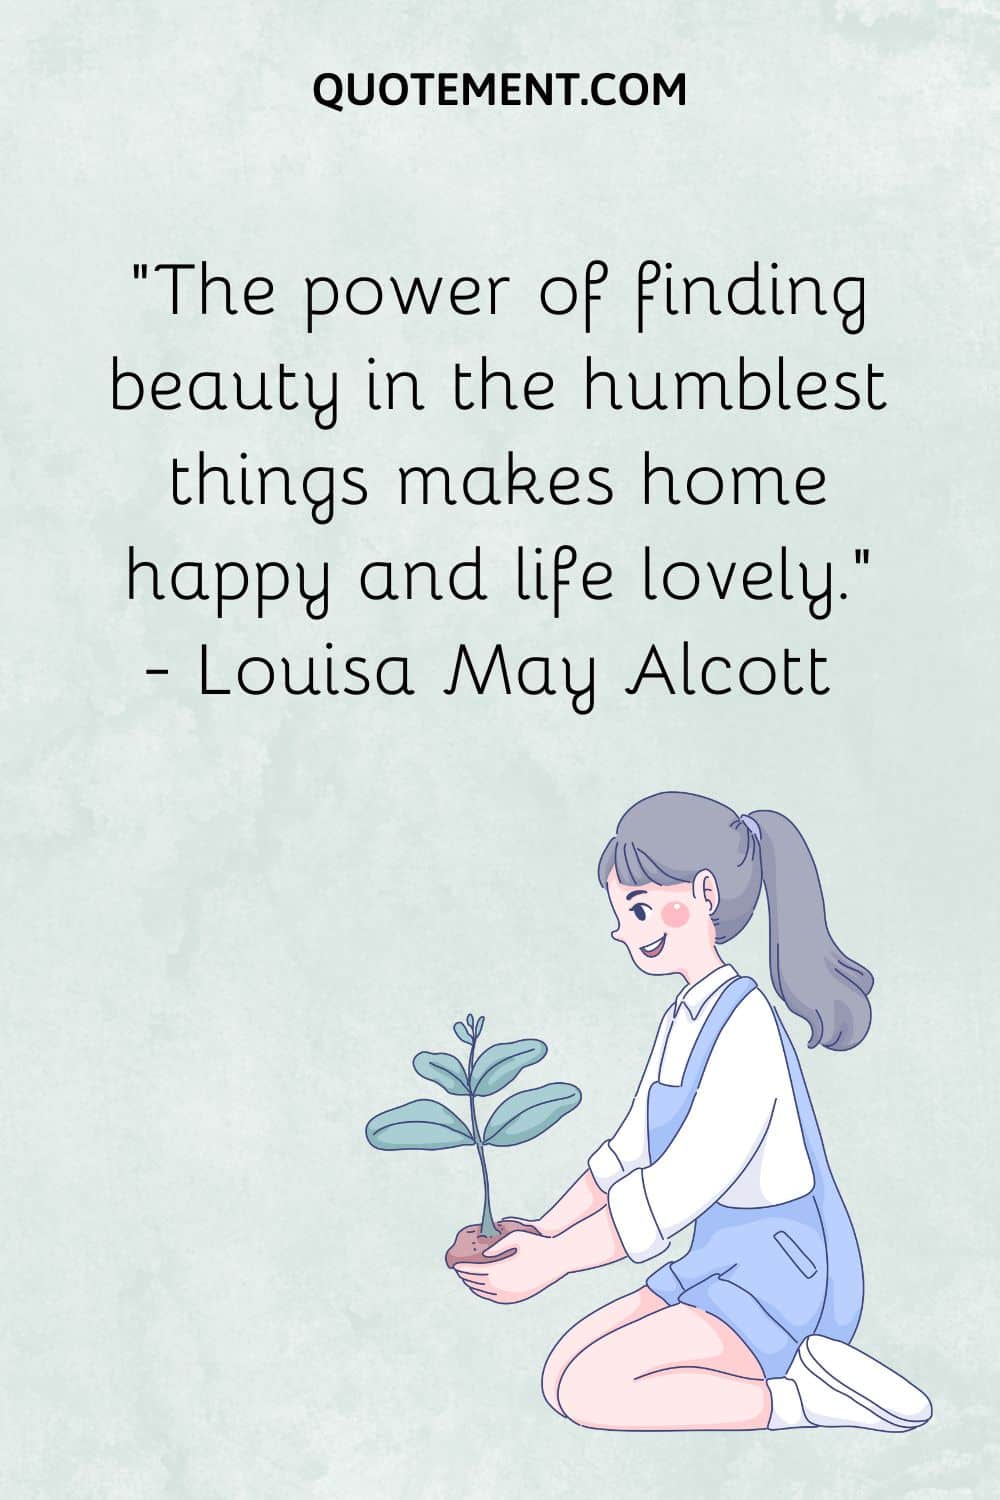 The power of finding beauty in the humblest things makes home happy and life lovely